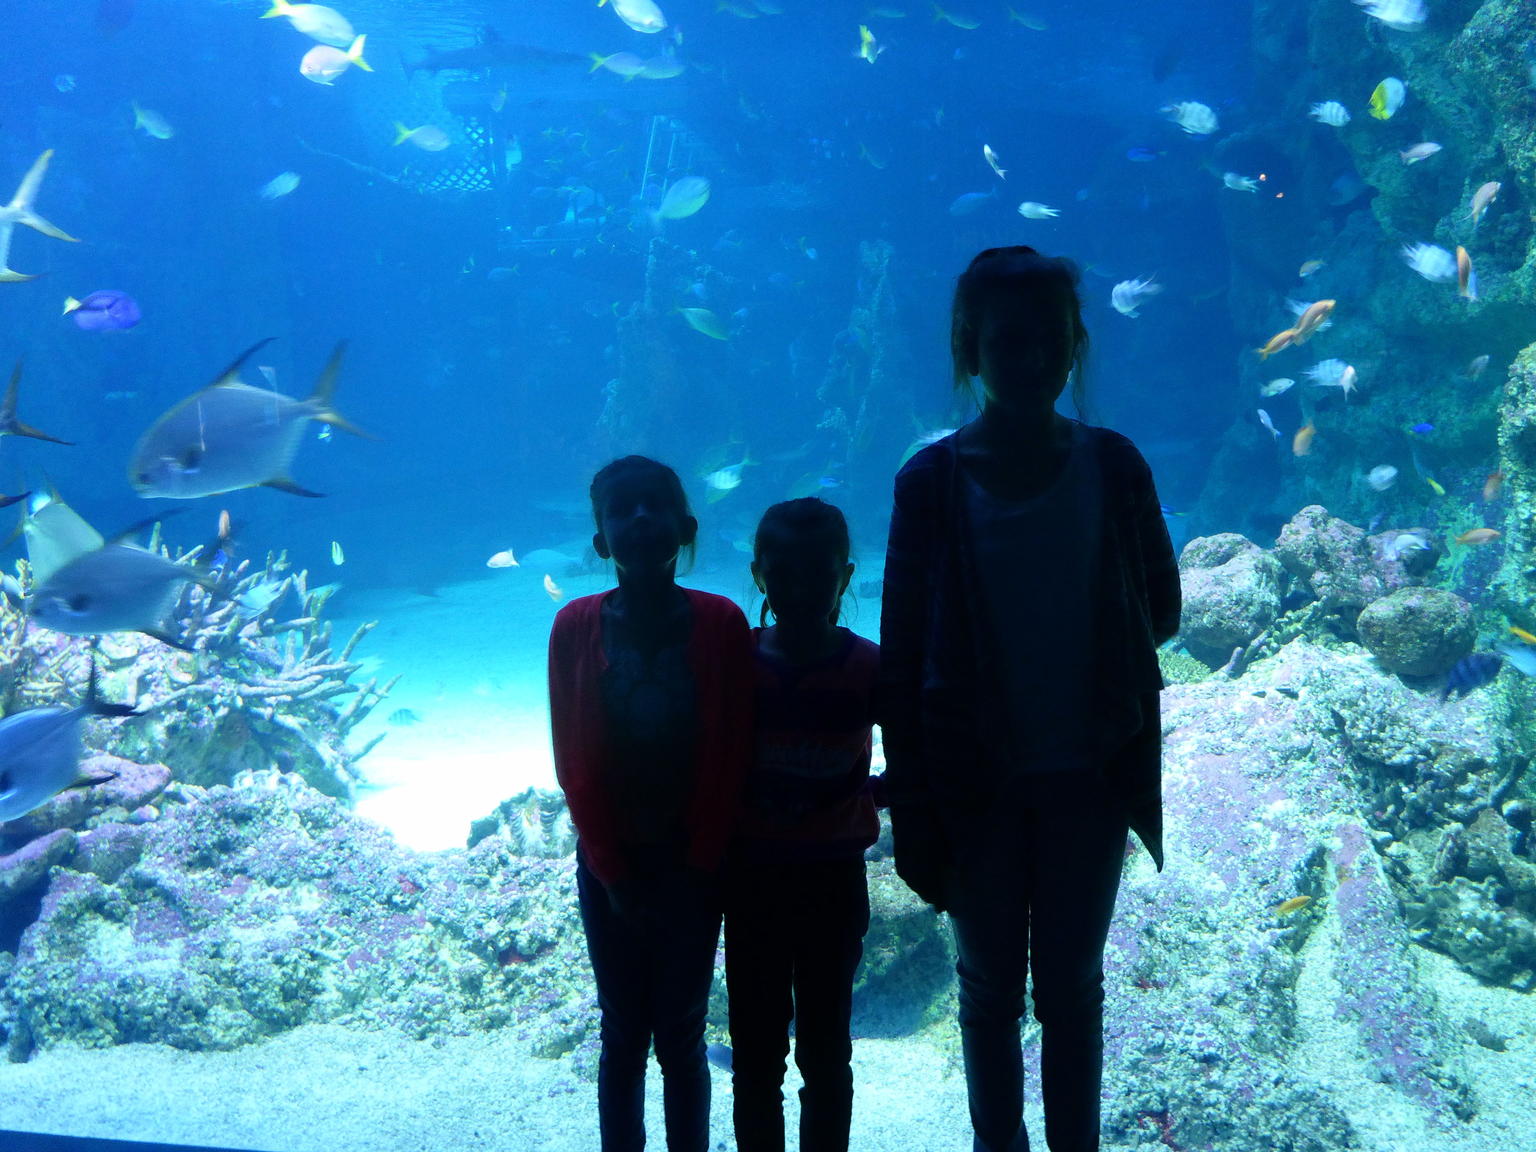 The kids loved the amazing tanks with all the fish  and  sharks.